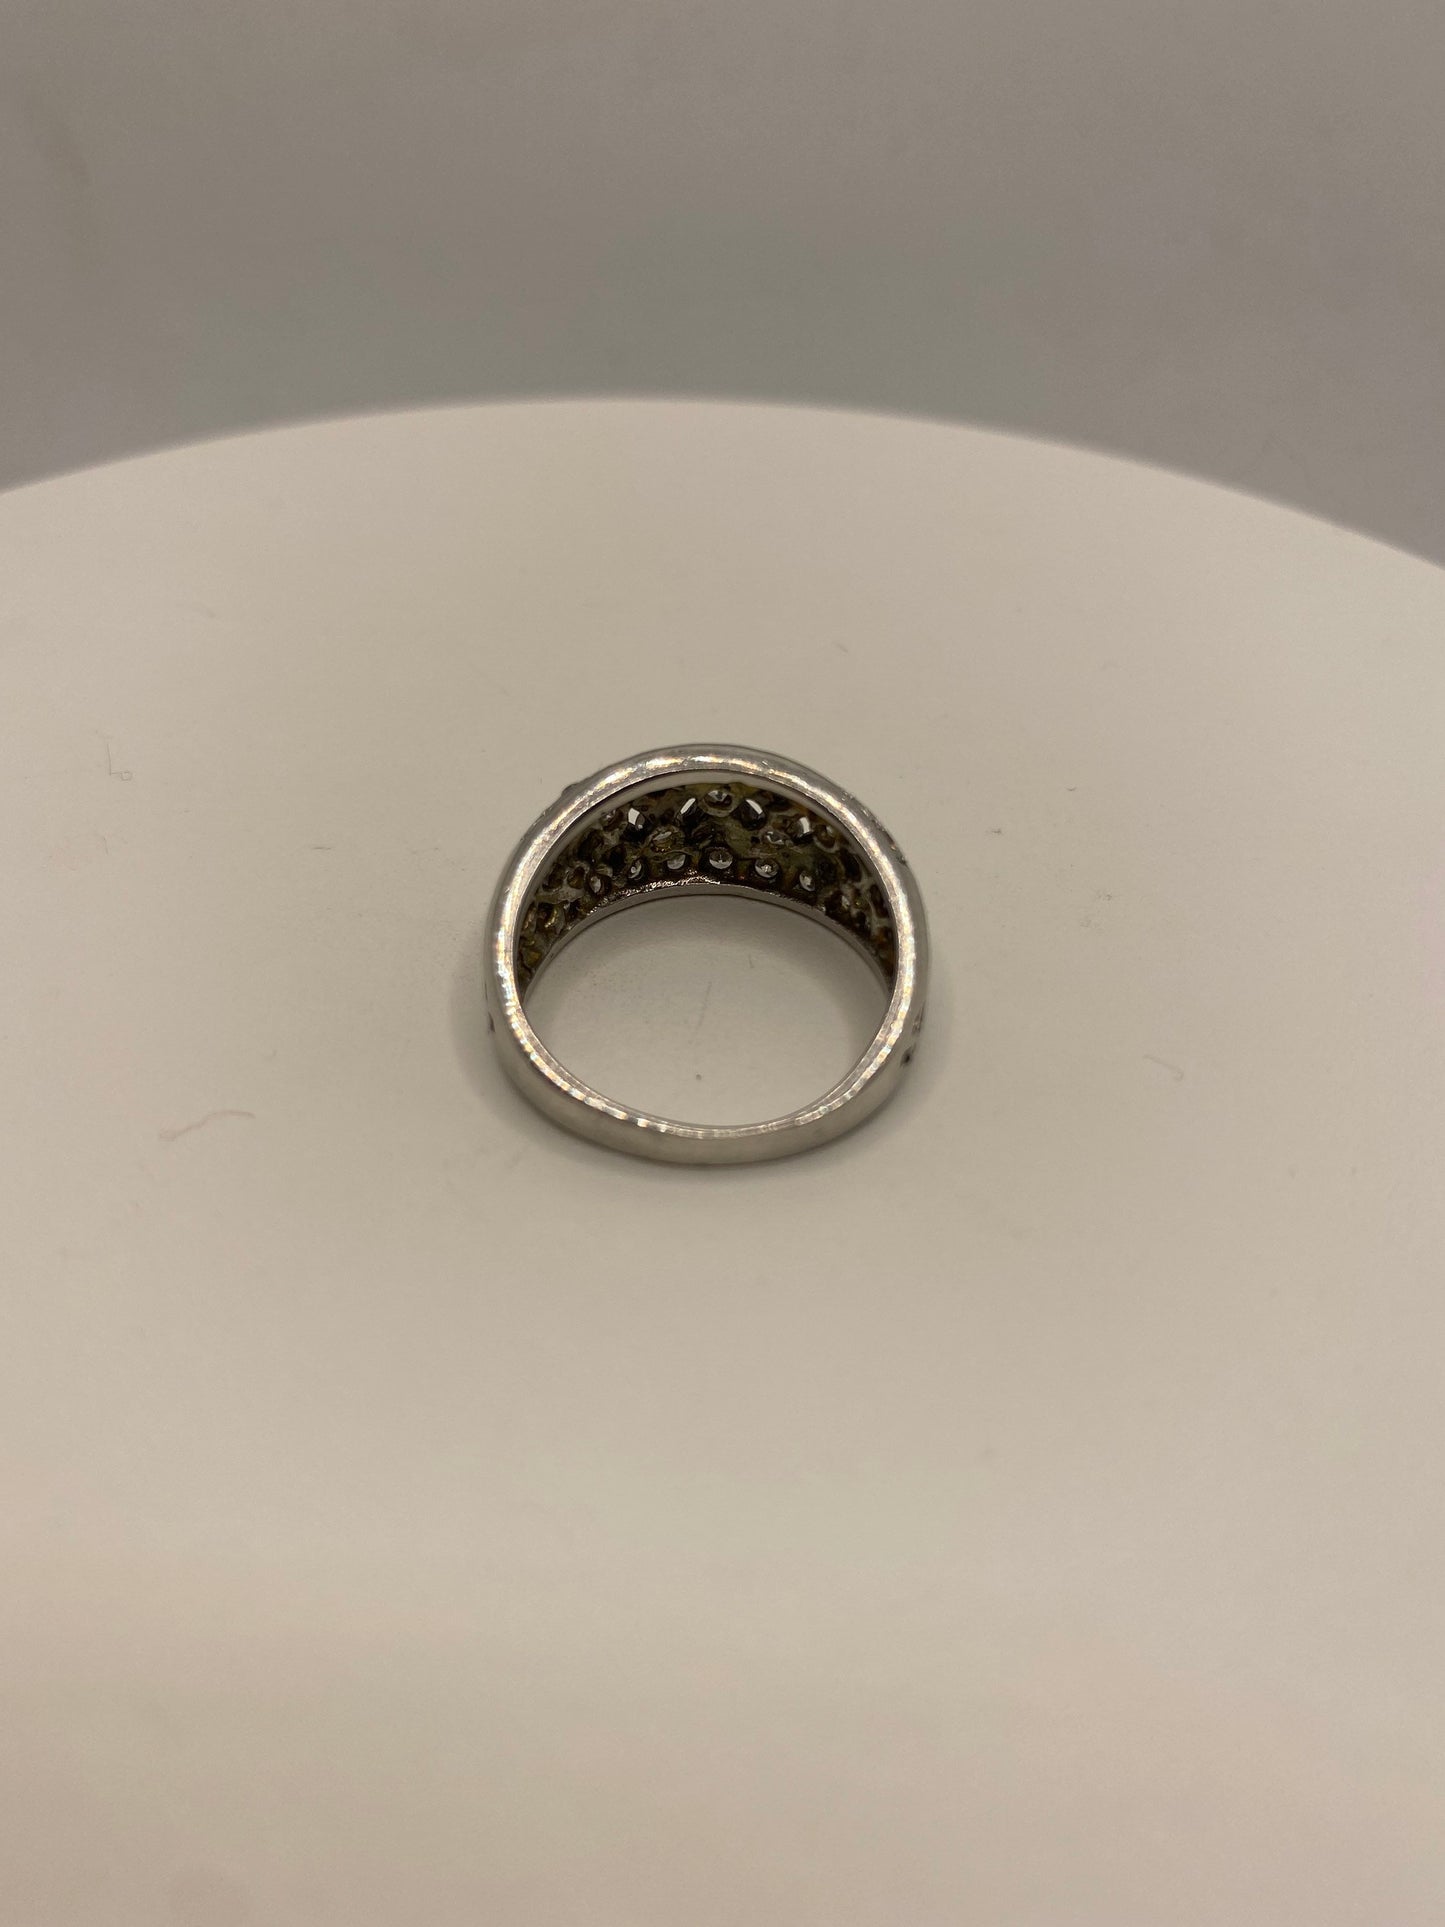 Vintage White Sapphire 925 Sterling Silver Wedding Band Ring